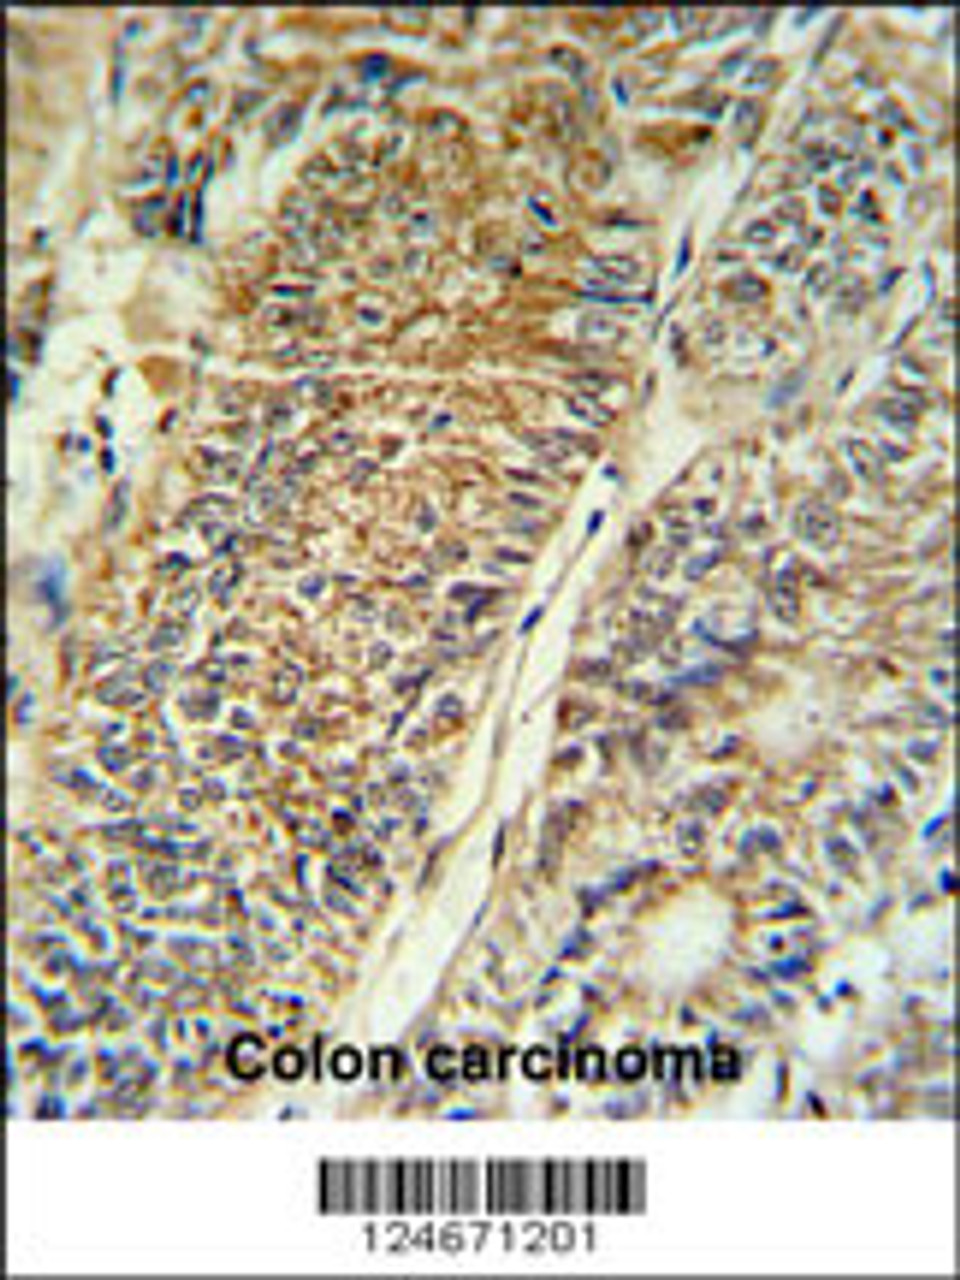 PYCR1 Antibody IHC analysis in formalin fixed and paraffin embedded colon carcinoma followed by peroxidase conjugation of the secondary antibody and DAB staining.